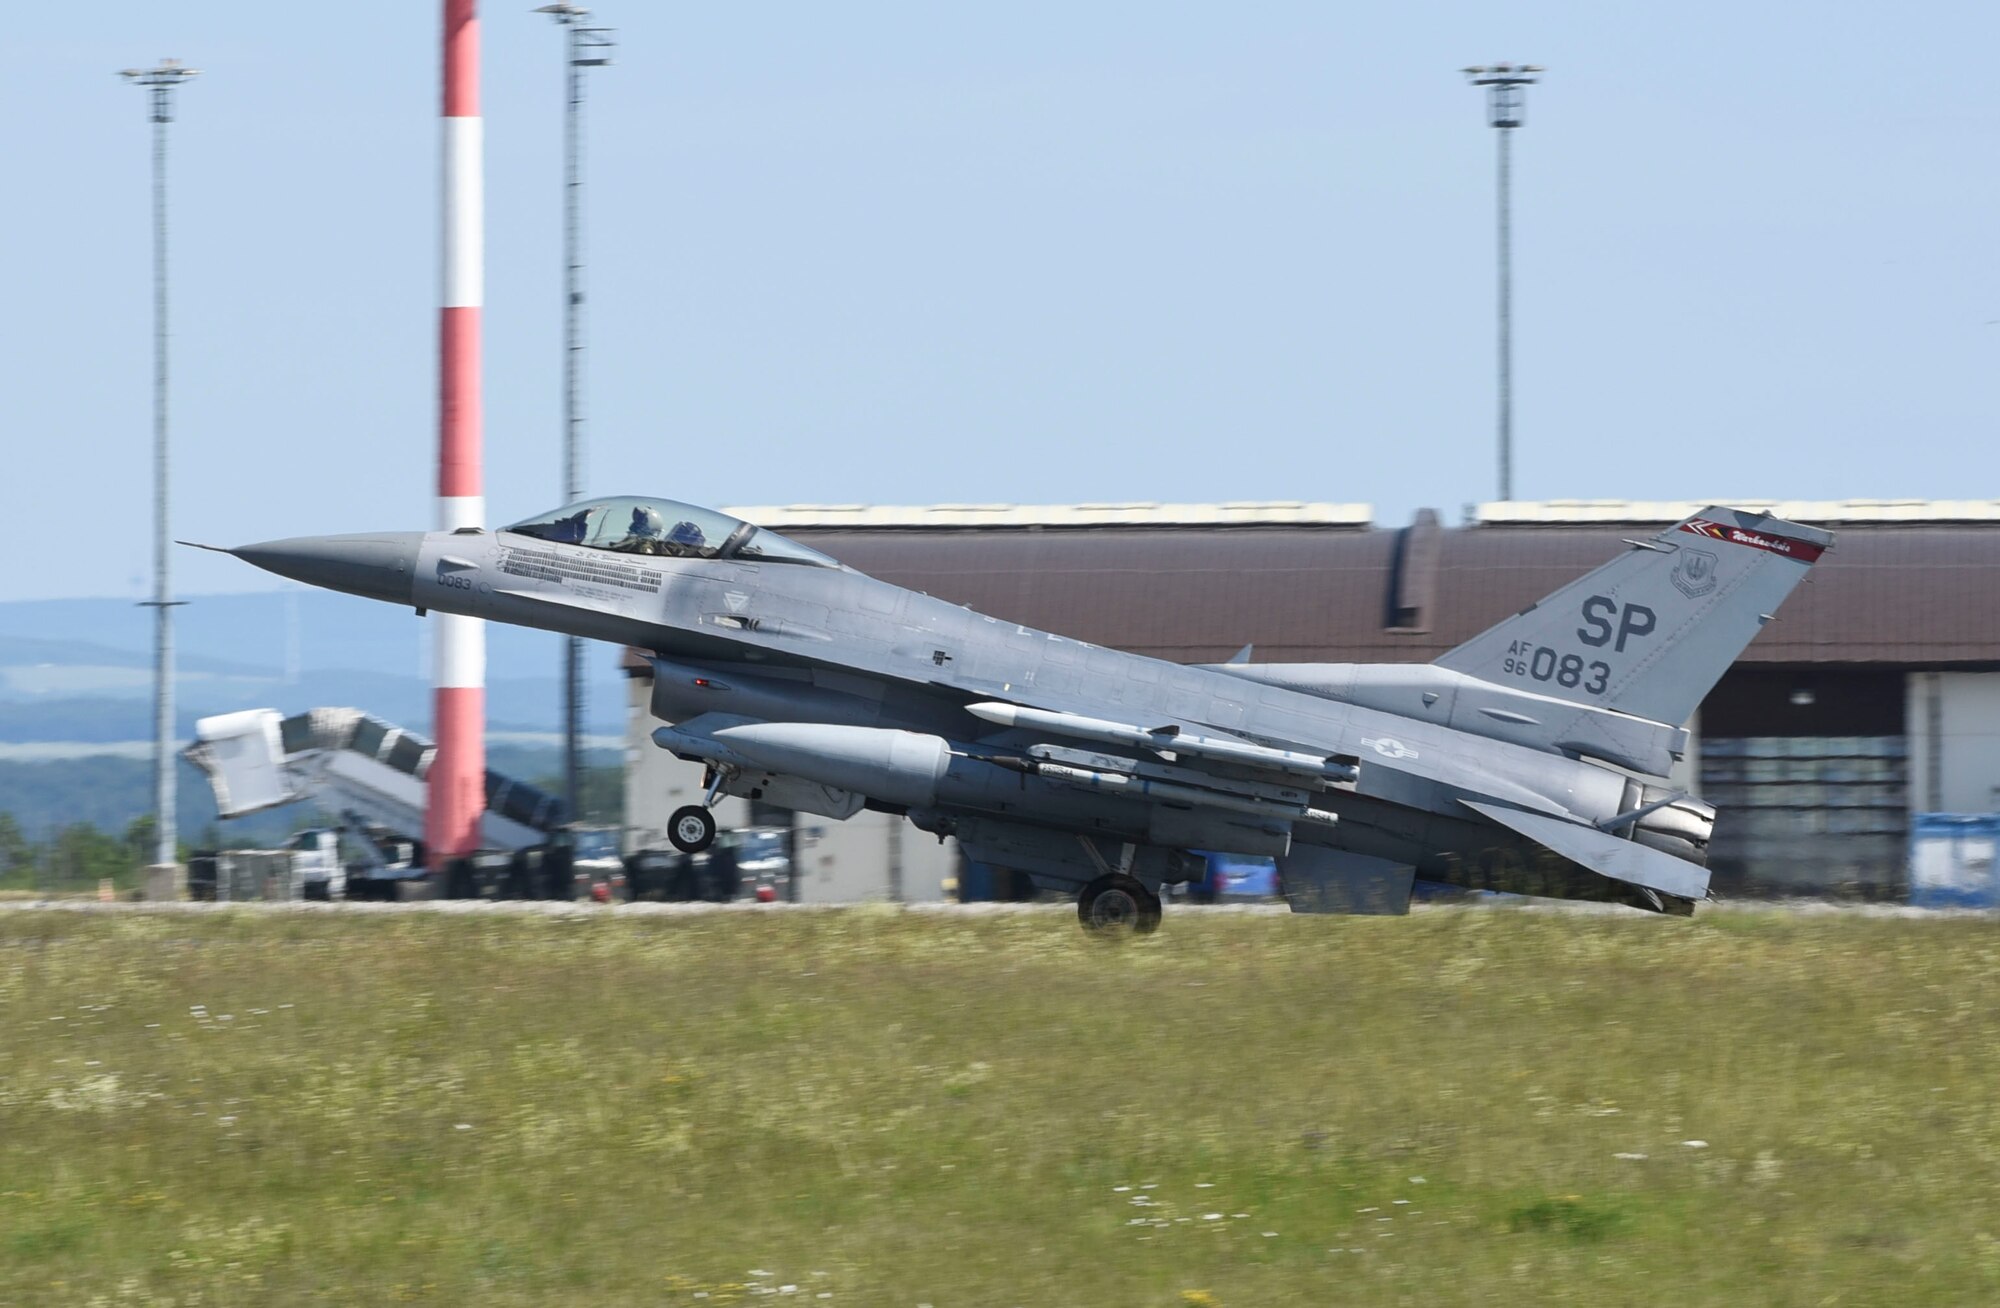 An U.S. Air Force F-16 Fighting Falcon, assigned to the 480th Fighter Squadron, lands at Spangdahlem Air Base, Germany, to participate in a large force exercise within the North Sea airspace, U.K., May 27, 2020. These exercises provide both aircrew and support personnel the experience needed to maintain a ready force, and by integrating multiple aircraft, aircrews are able to train for different objectives, which is critical to ensuring the collective defense of the NATO alliance. (U.S. Air Force photo by Senior Airman Melody W. Howley)